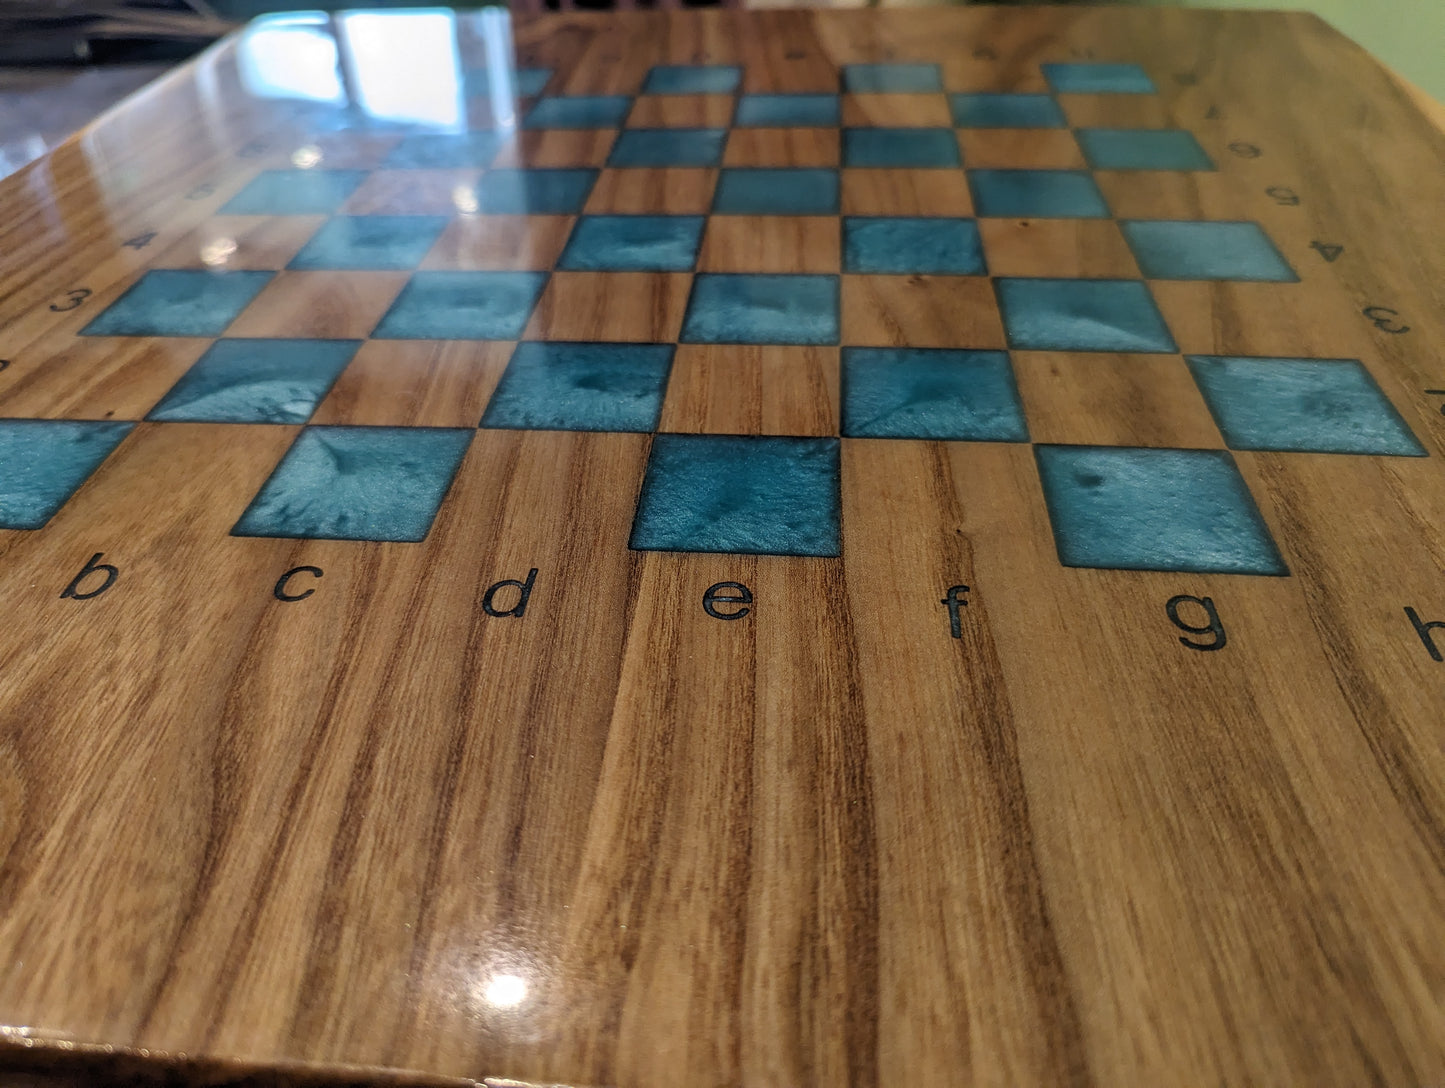 Handmade 23" chess table with notations. Wood and epoxy.